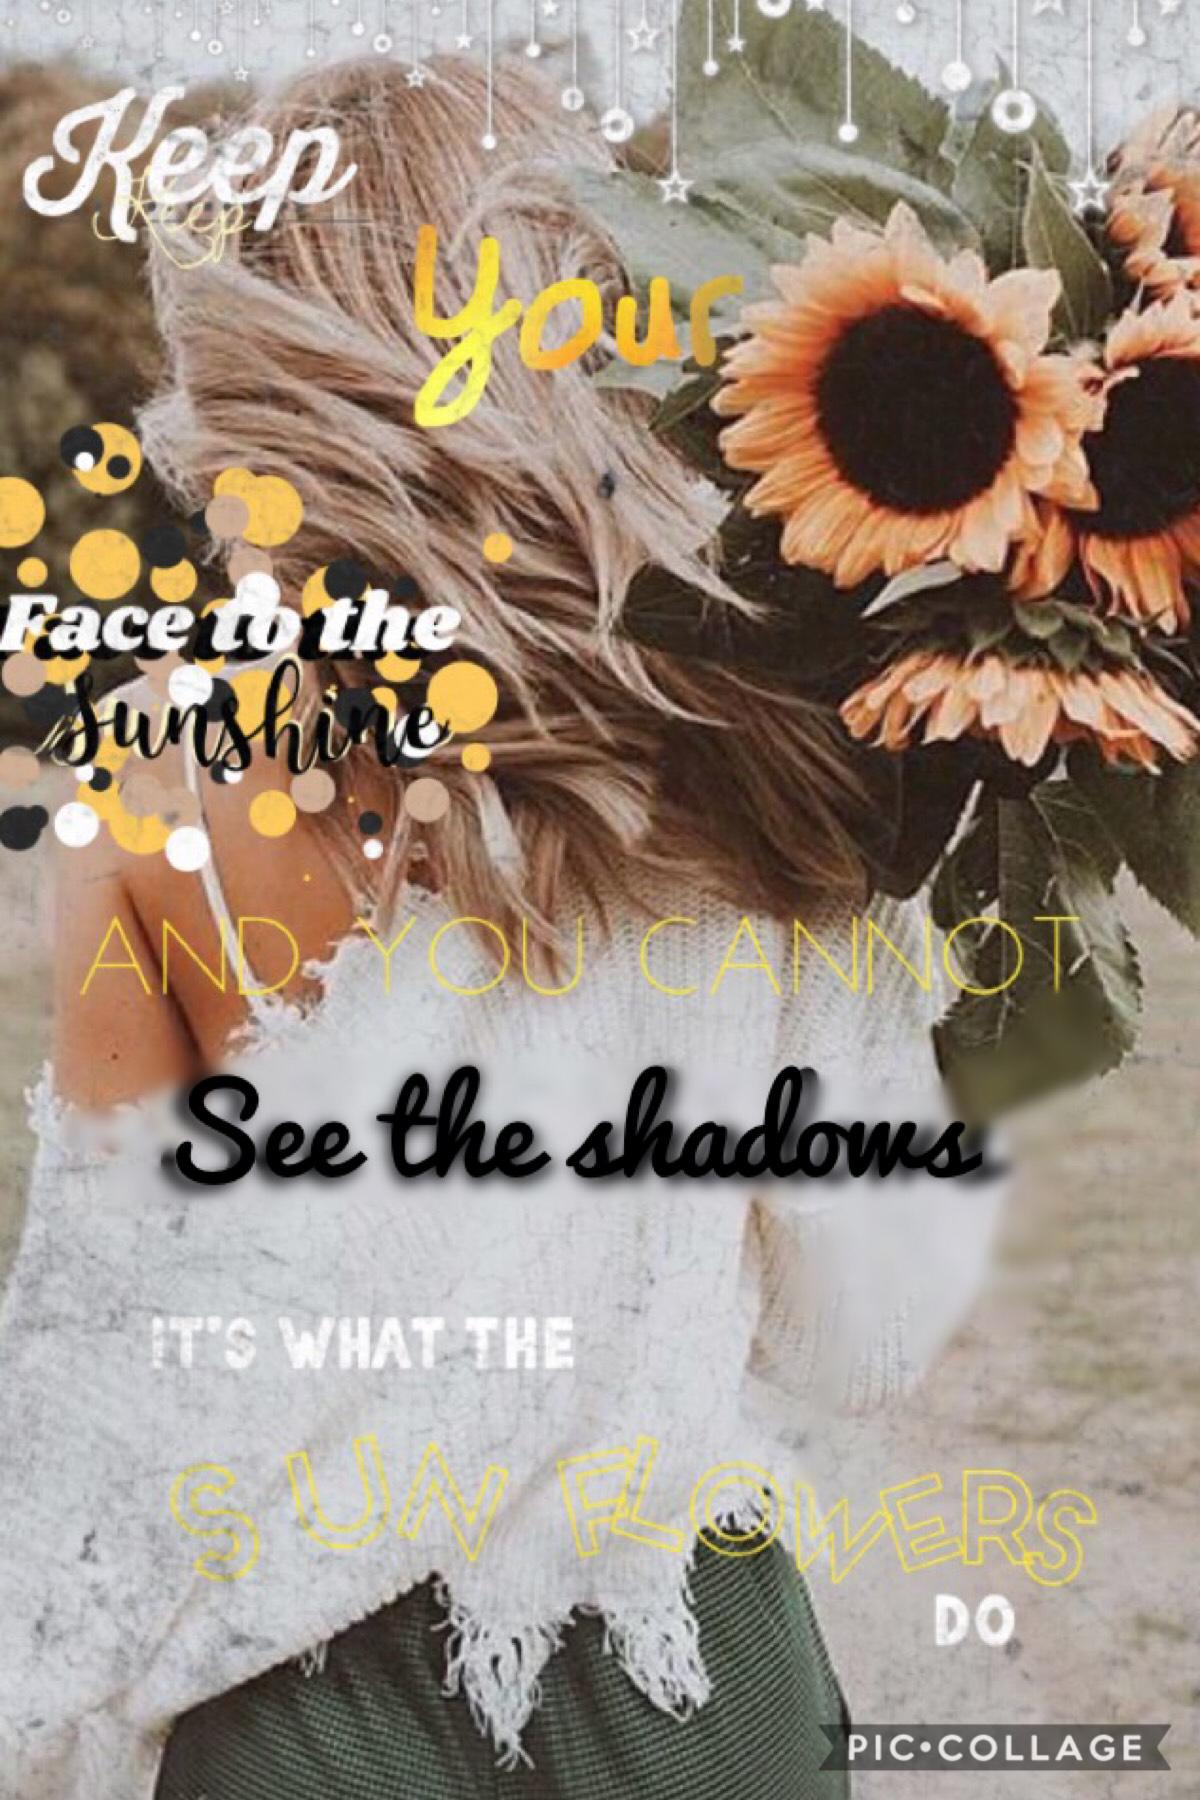 🌻~tap~🌻


Keep your face to the sunshine and you cannot see the shadows, its what the sunflowers do. 

REMINDER “Enter my icon contest to win some prizes”